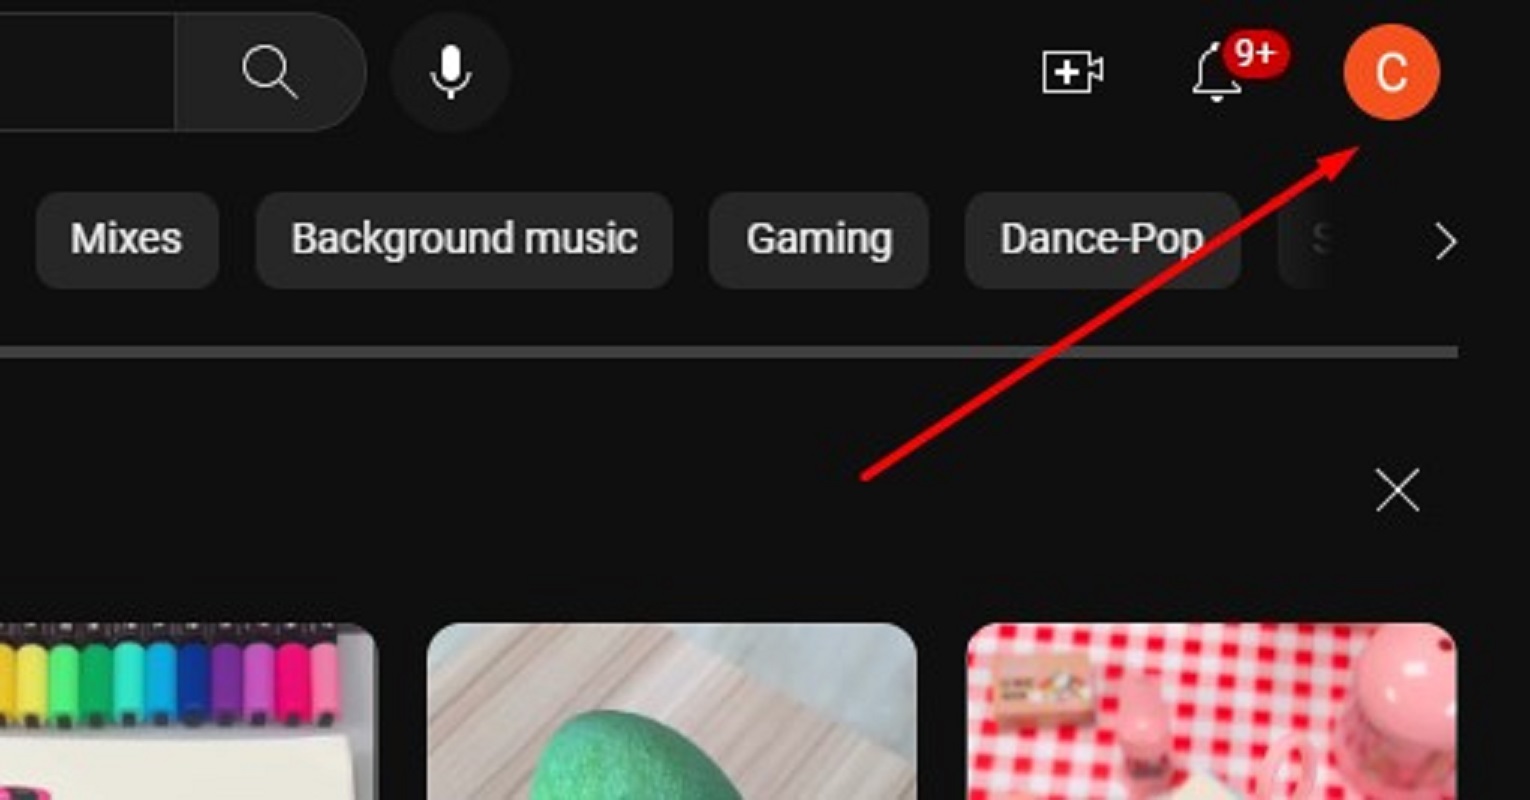 Youtube website - showing profile button